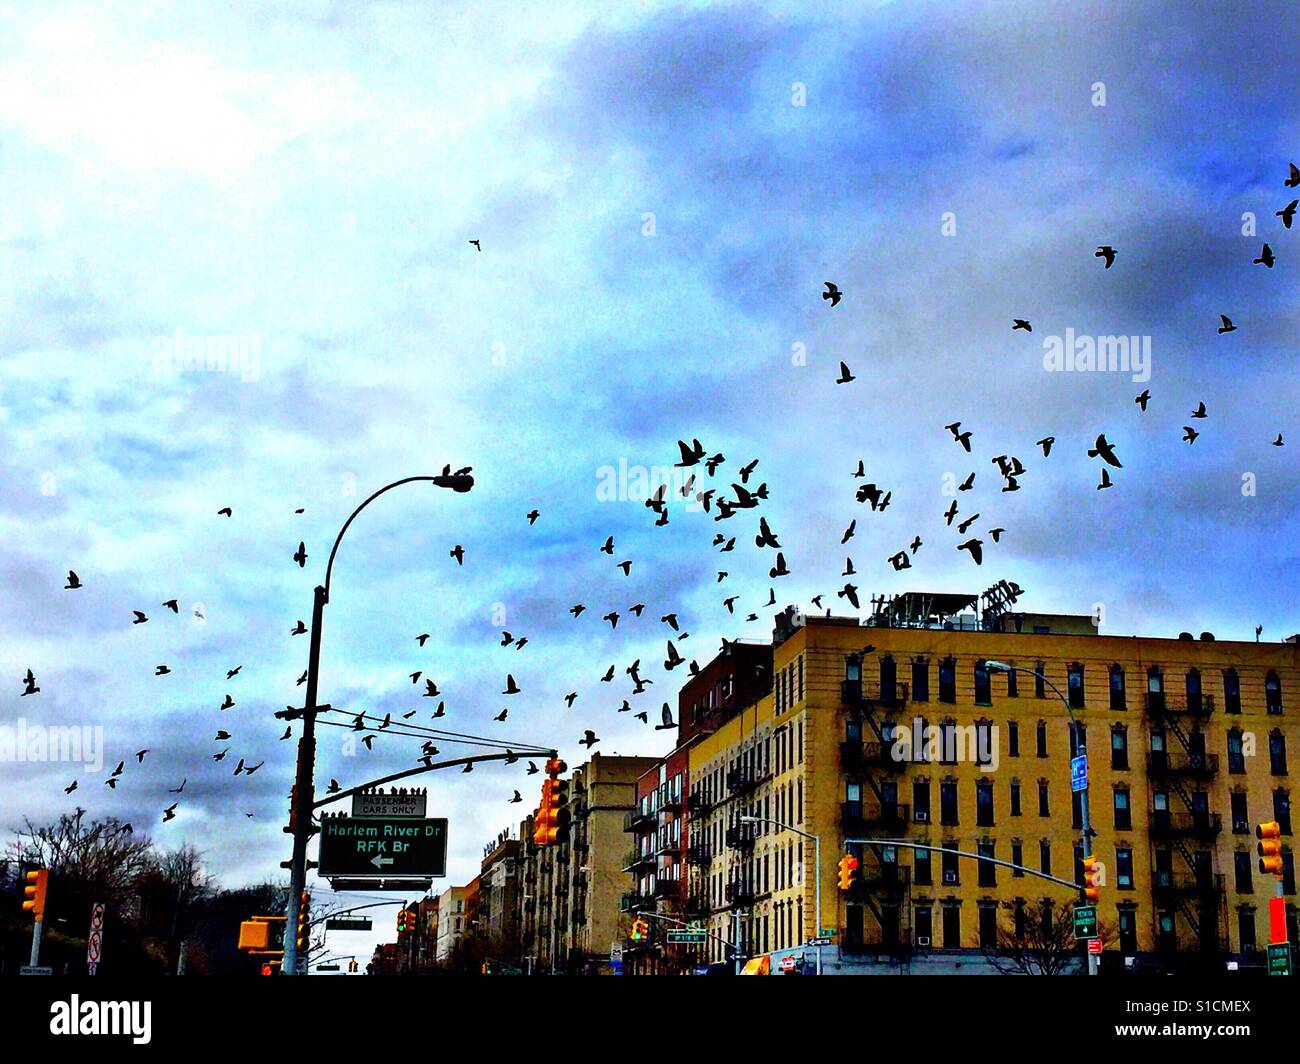 Not a remake of 'The Birds' but flocks of birds diving on the wind currents above the city before a storm Stock Photo